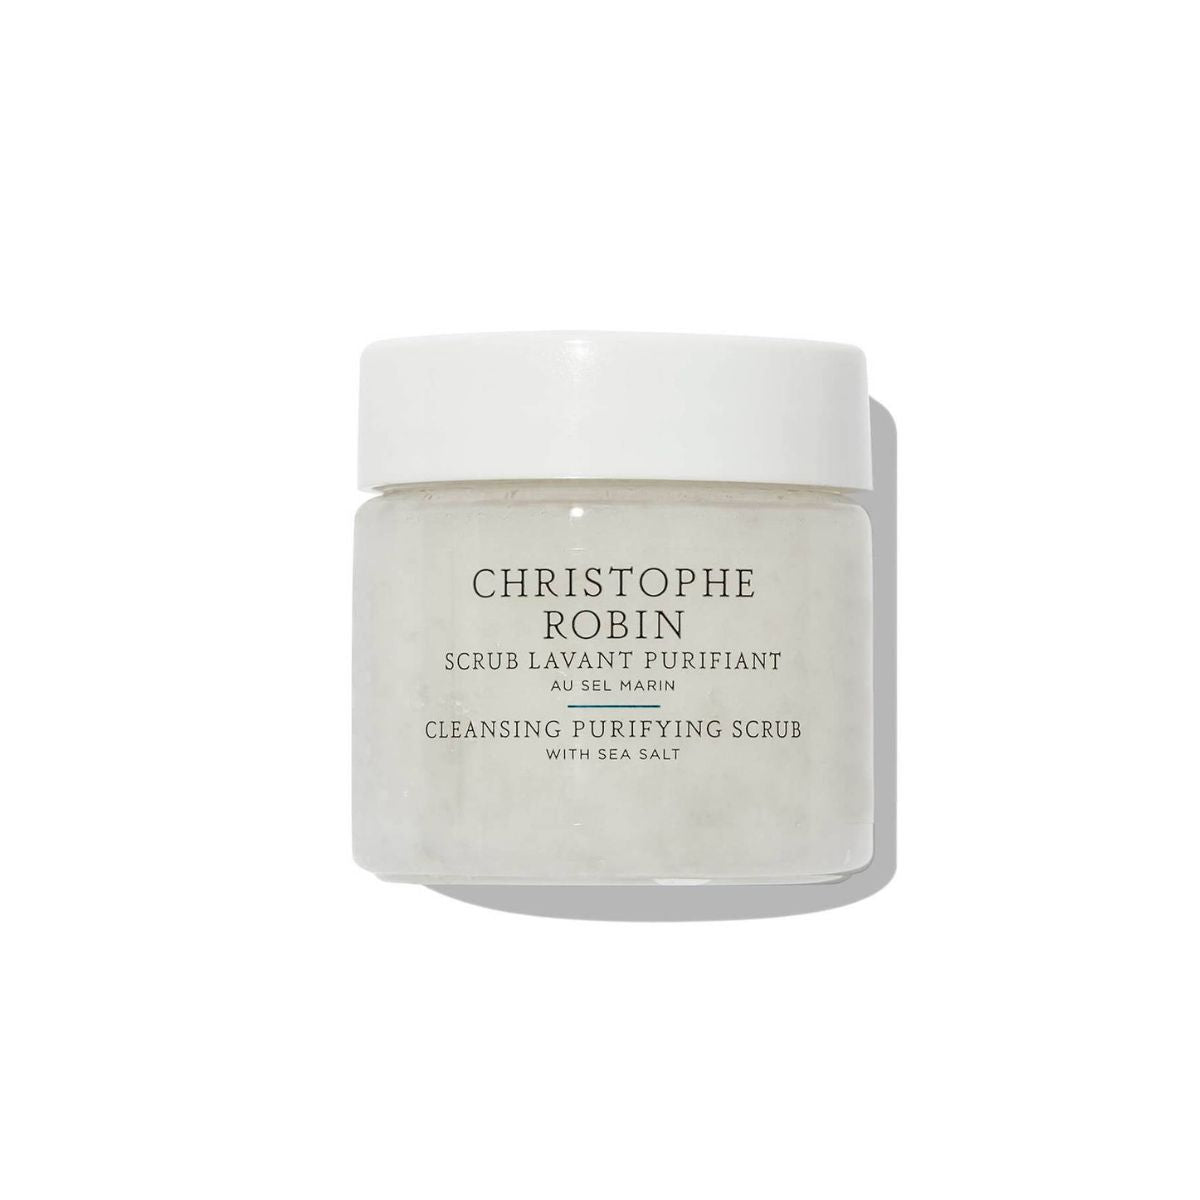 🎁 Free Christophe Robin Cleansing Purifying Scrub with Sea Salt Sensitive Oily Hair 40ml when you spend €20 or more on Christophe Robin. One gift per person. While stock lasts. (100% off)